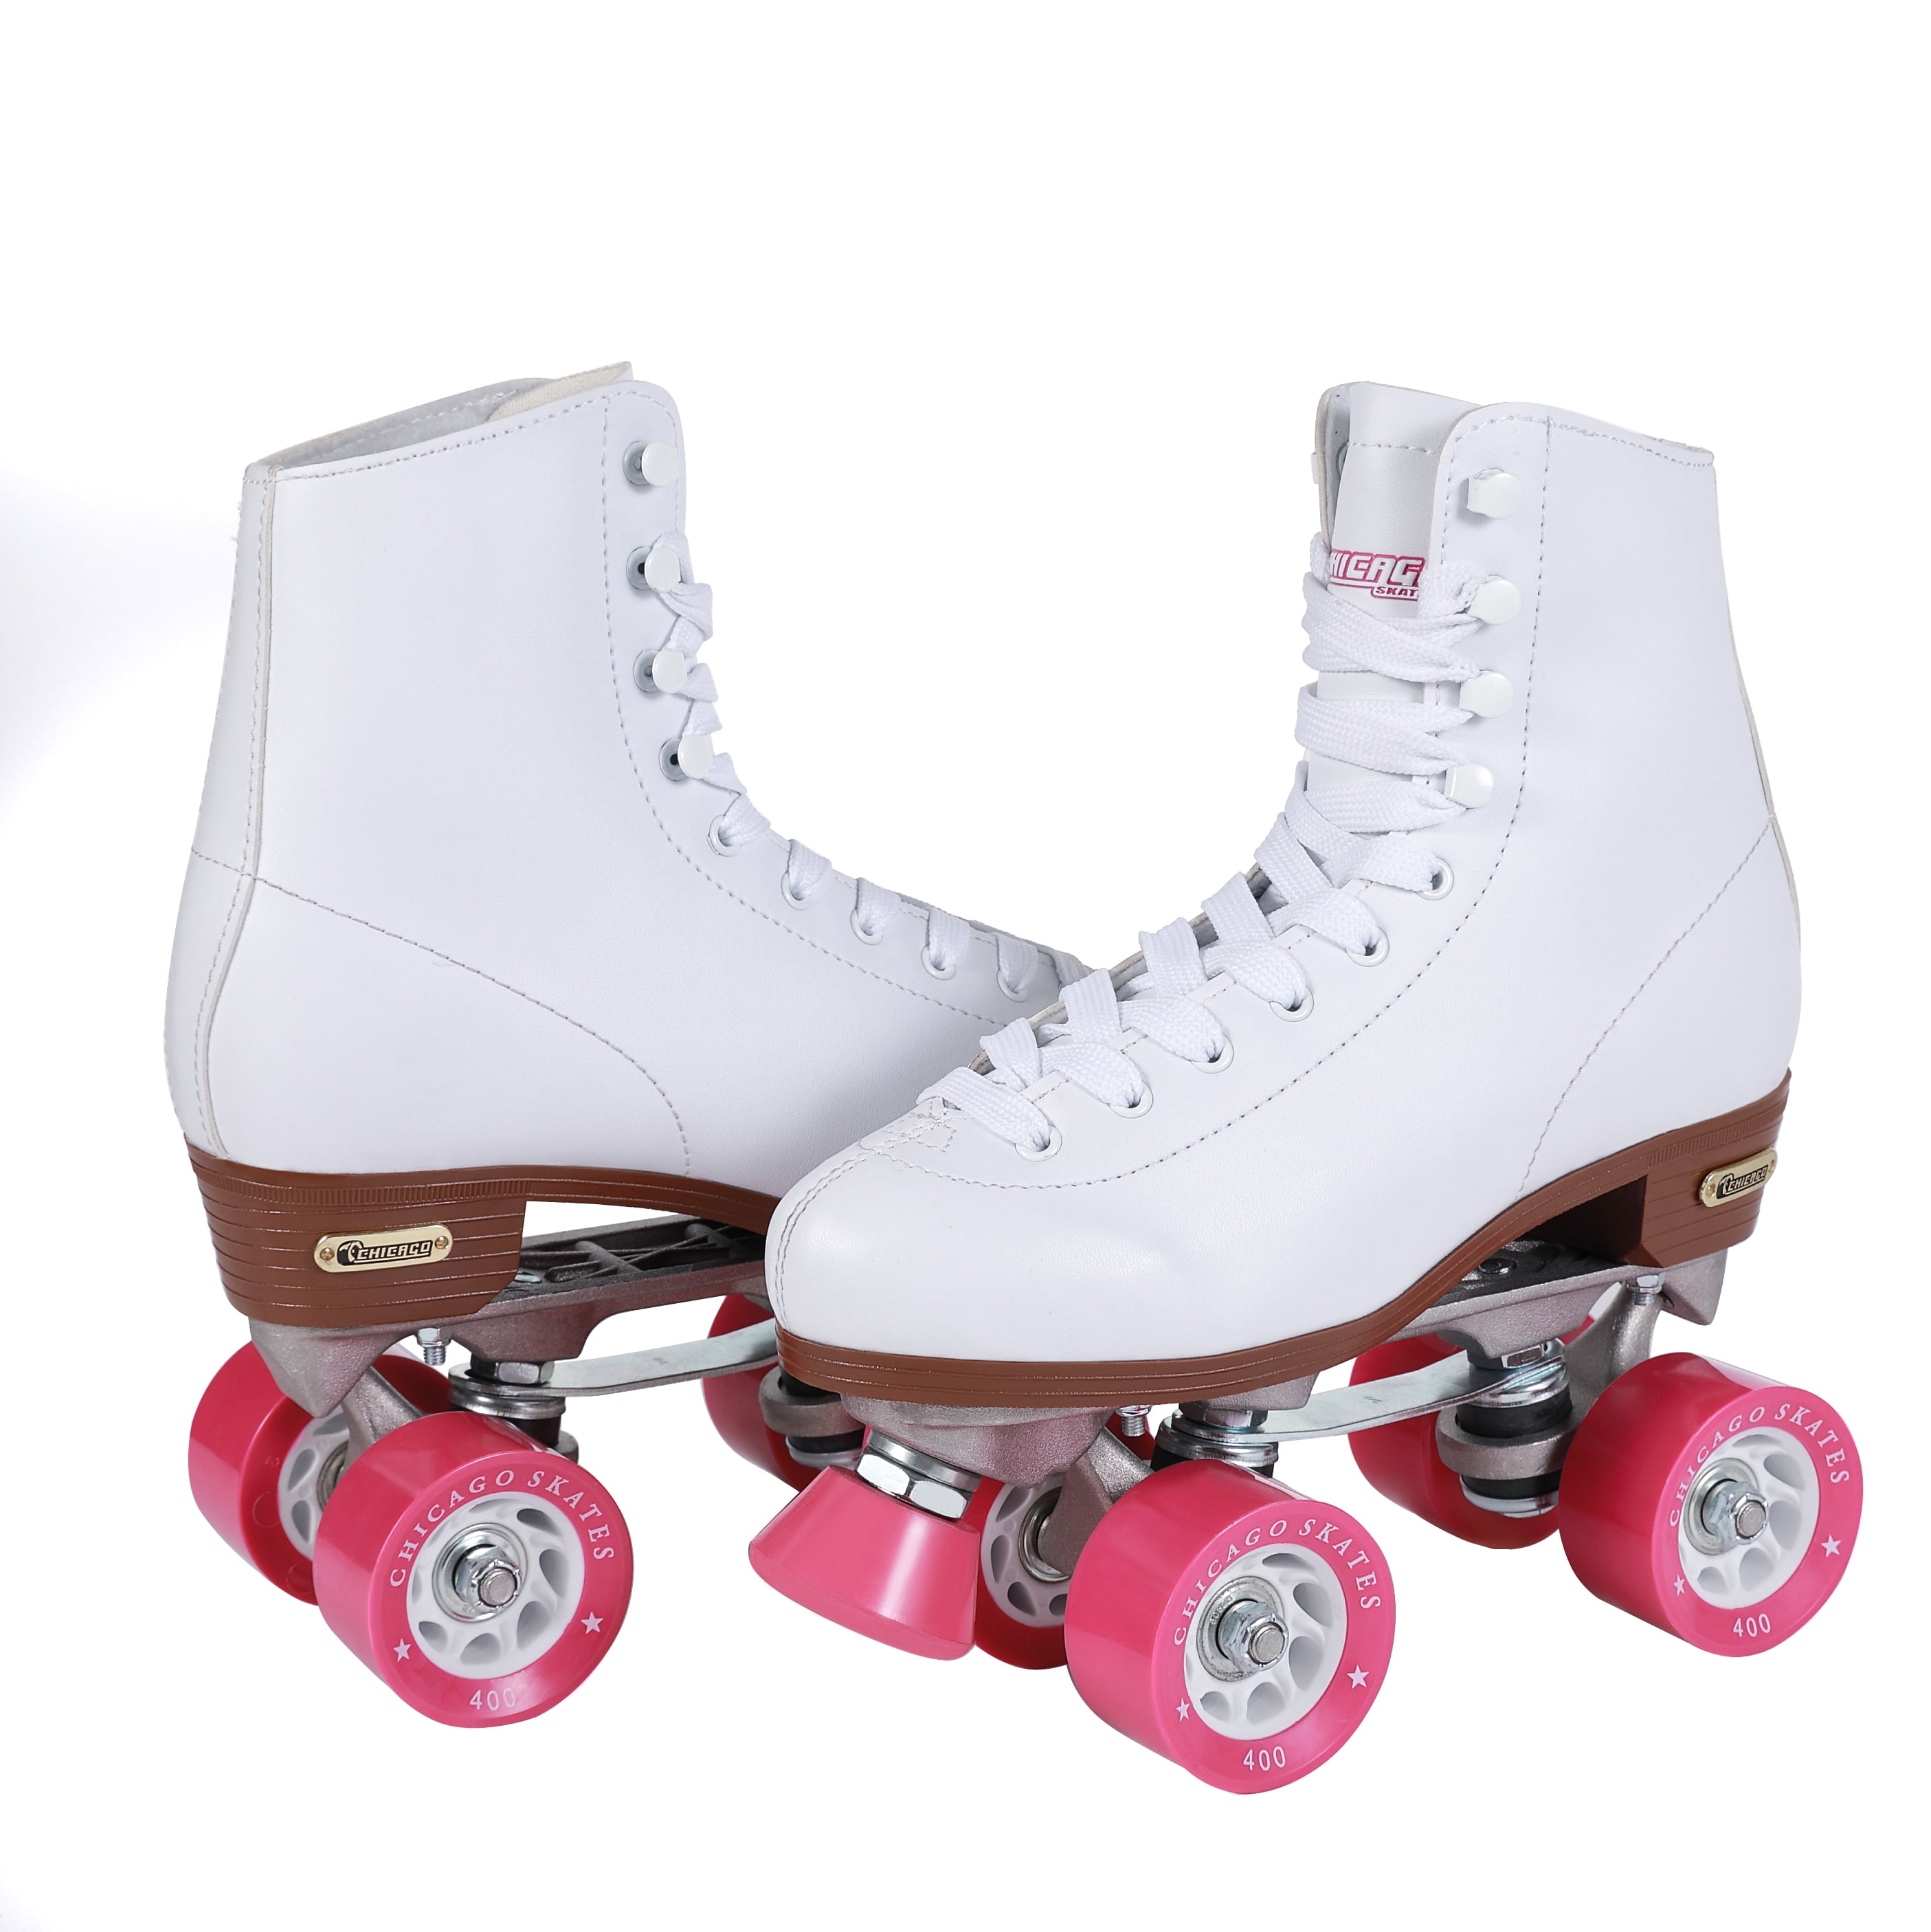 Details about   CHICAGO Roller Skates Ladies Women’s Size 10 Needs Wheels Replaced! 